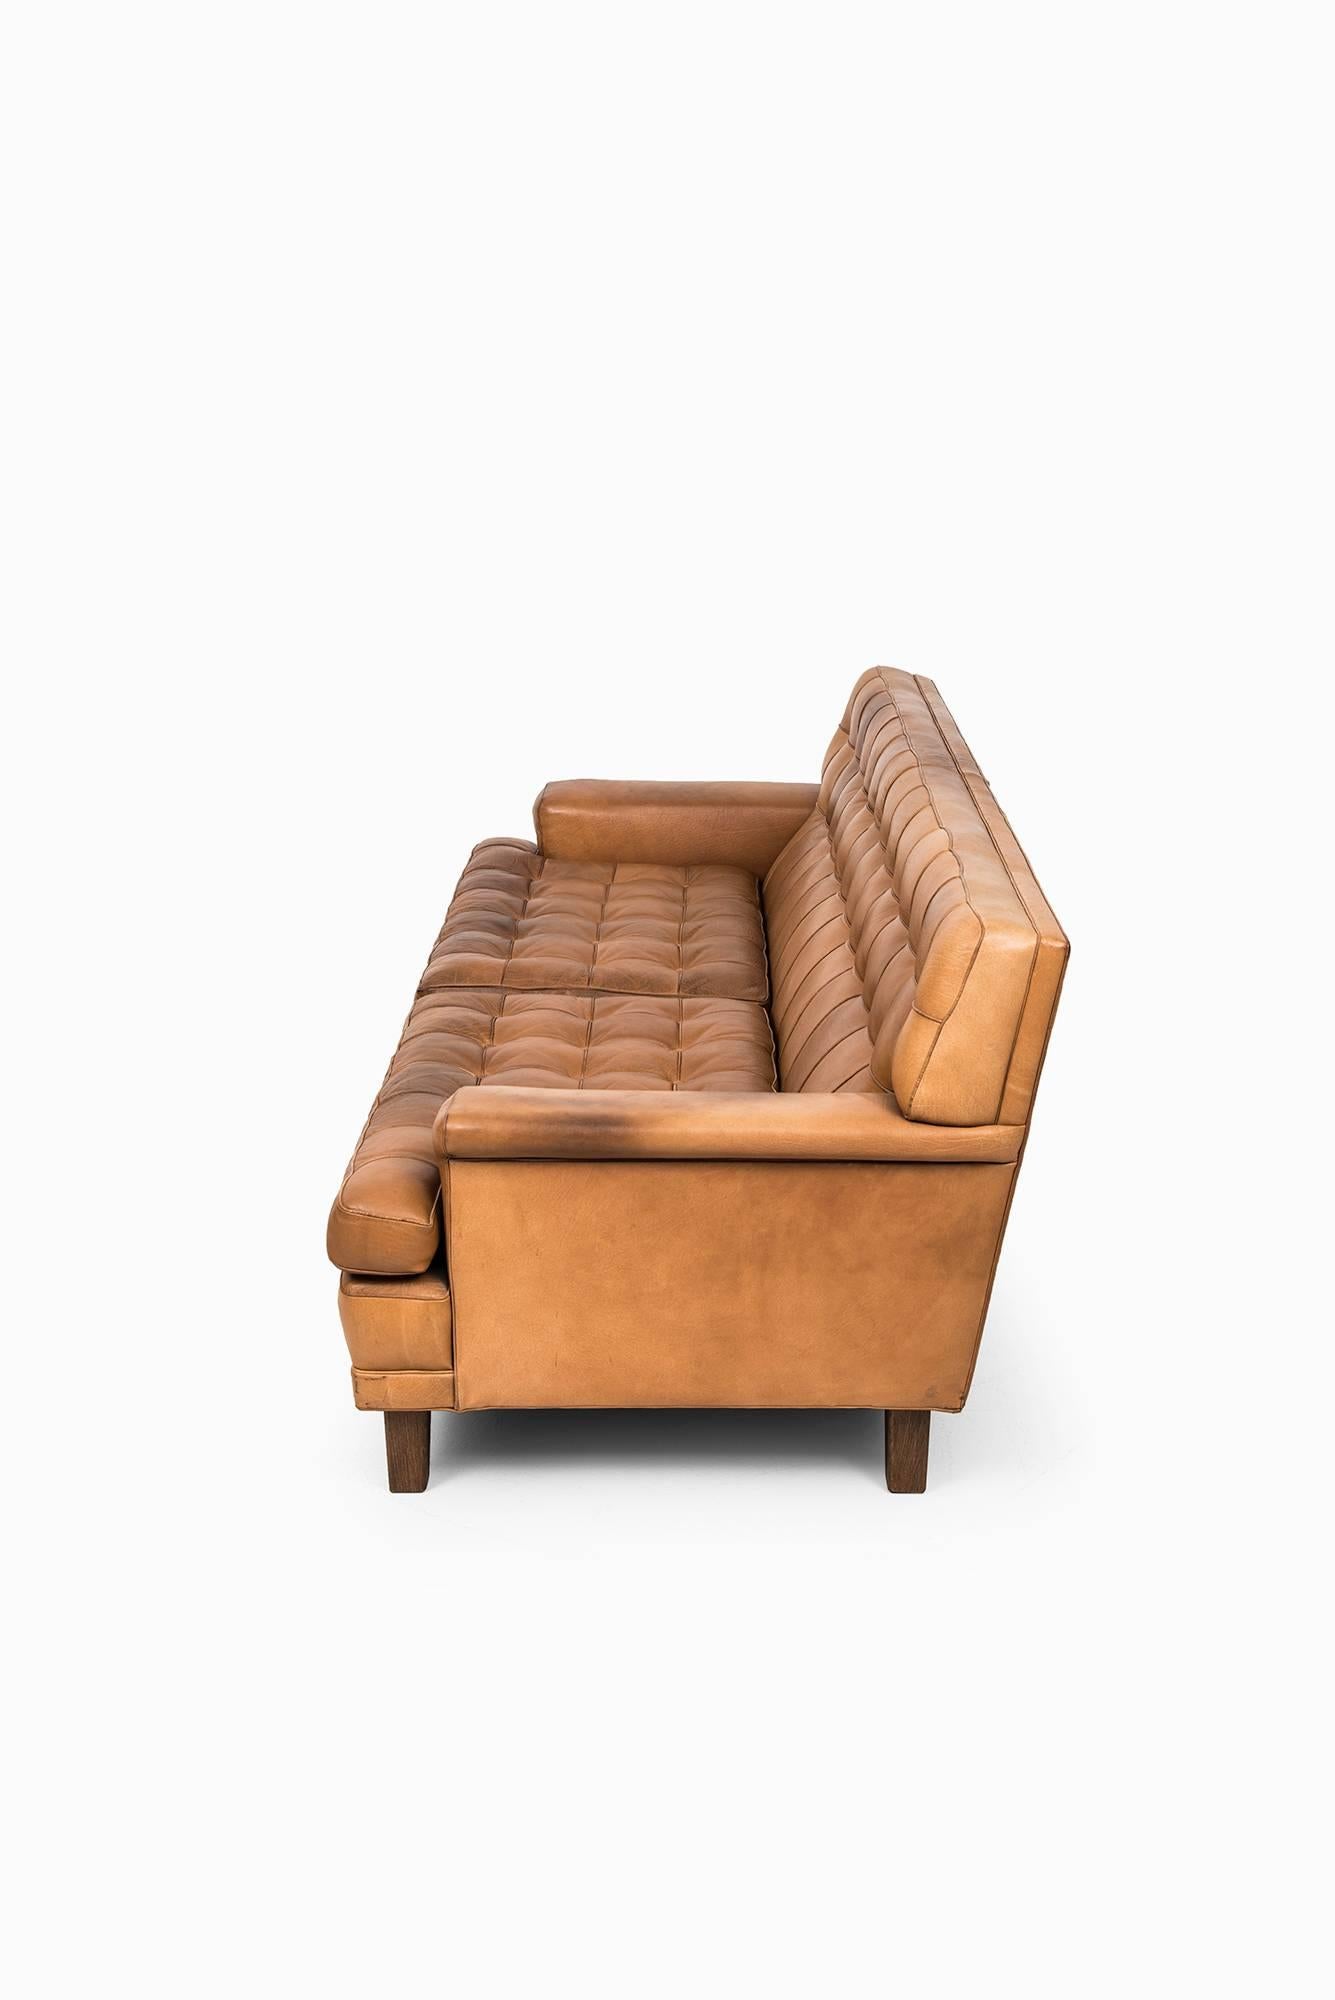 Sofa model Merkur designed by Arne Norell. Produced by Arne Norell AB in Aneby, Sweden.